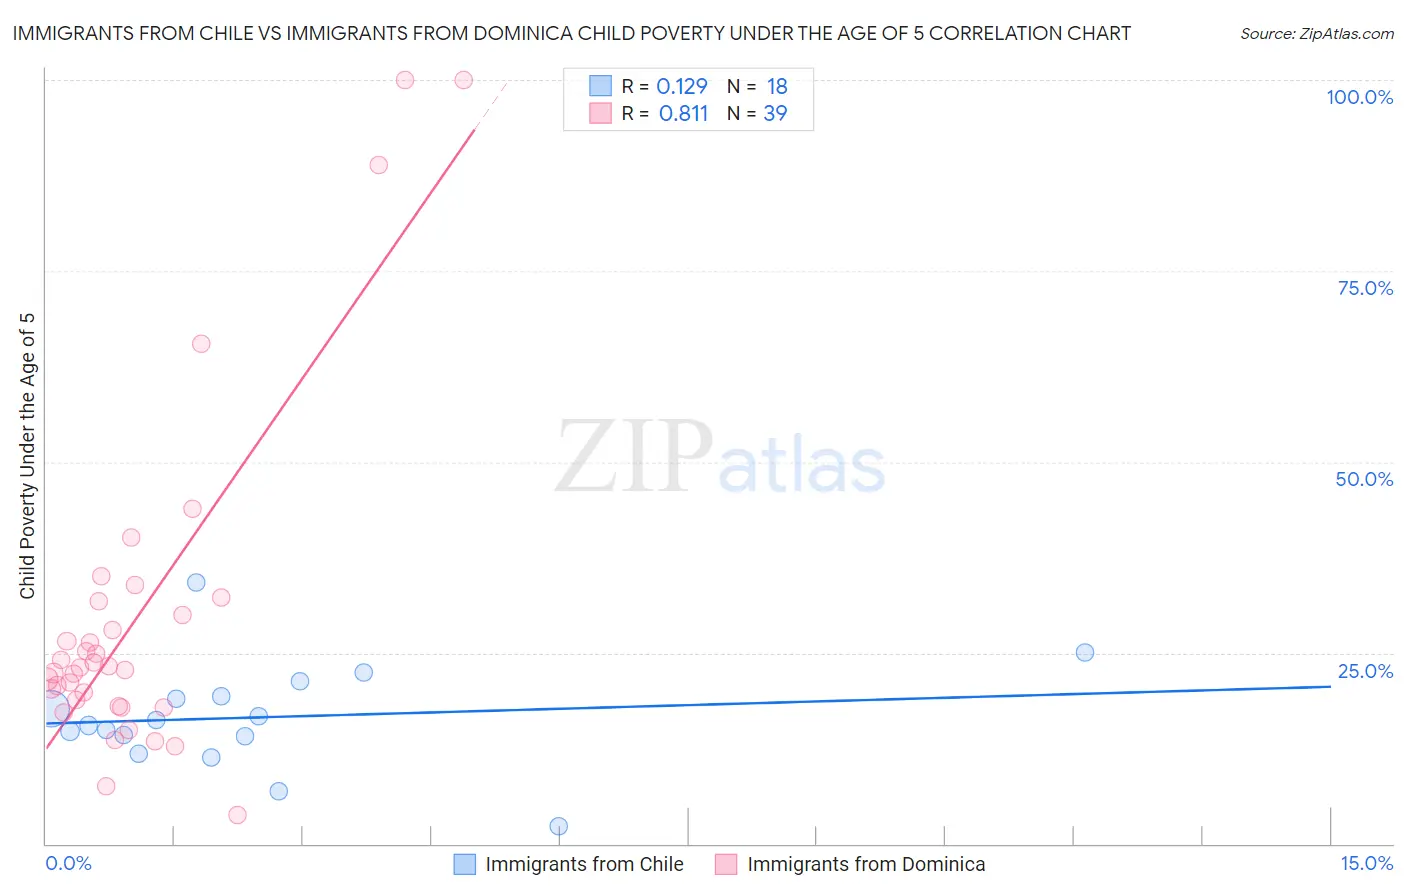 Immigrants from Chile vs Immigrants from Dominica Child Poverty Under the Age of 5